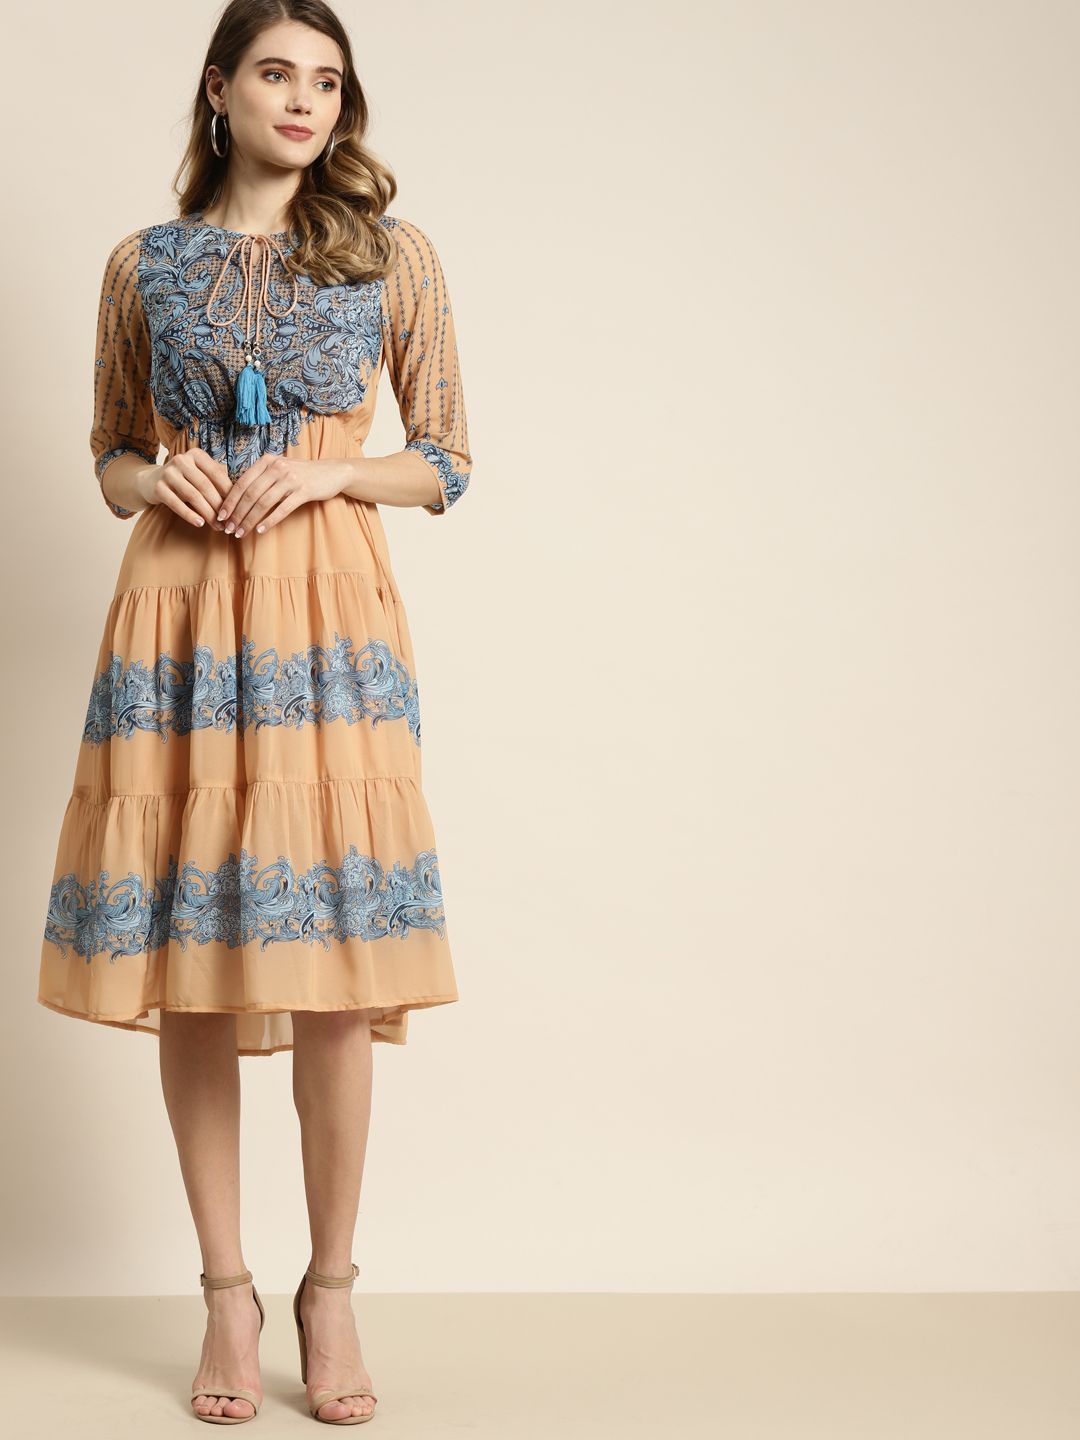 Juniper Peach-Coloured & Teal Blue Ethnic Motifs Tie-Up Neck Tiered Fit & Flare Dress Price in India